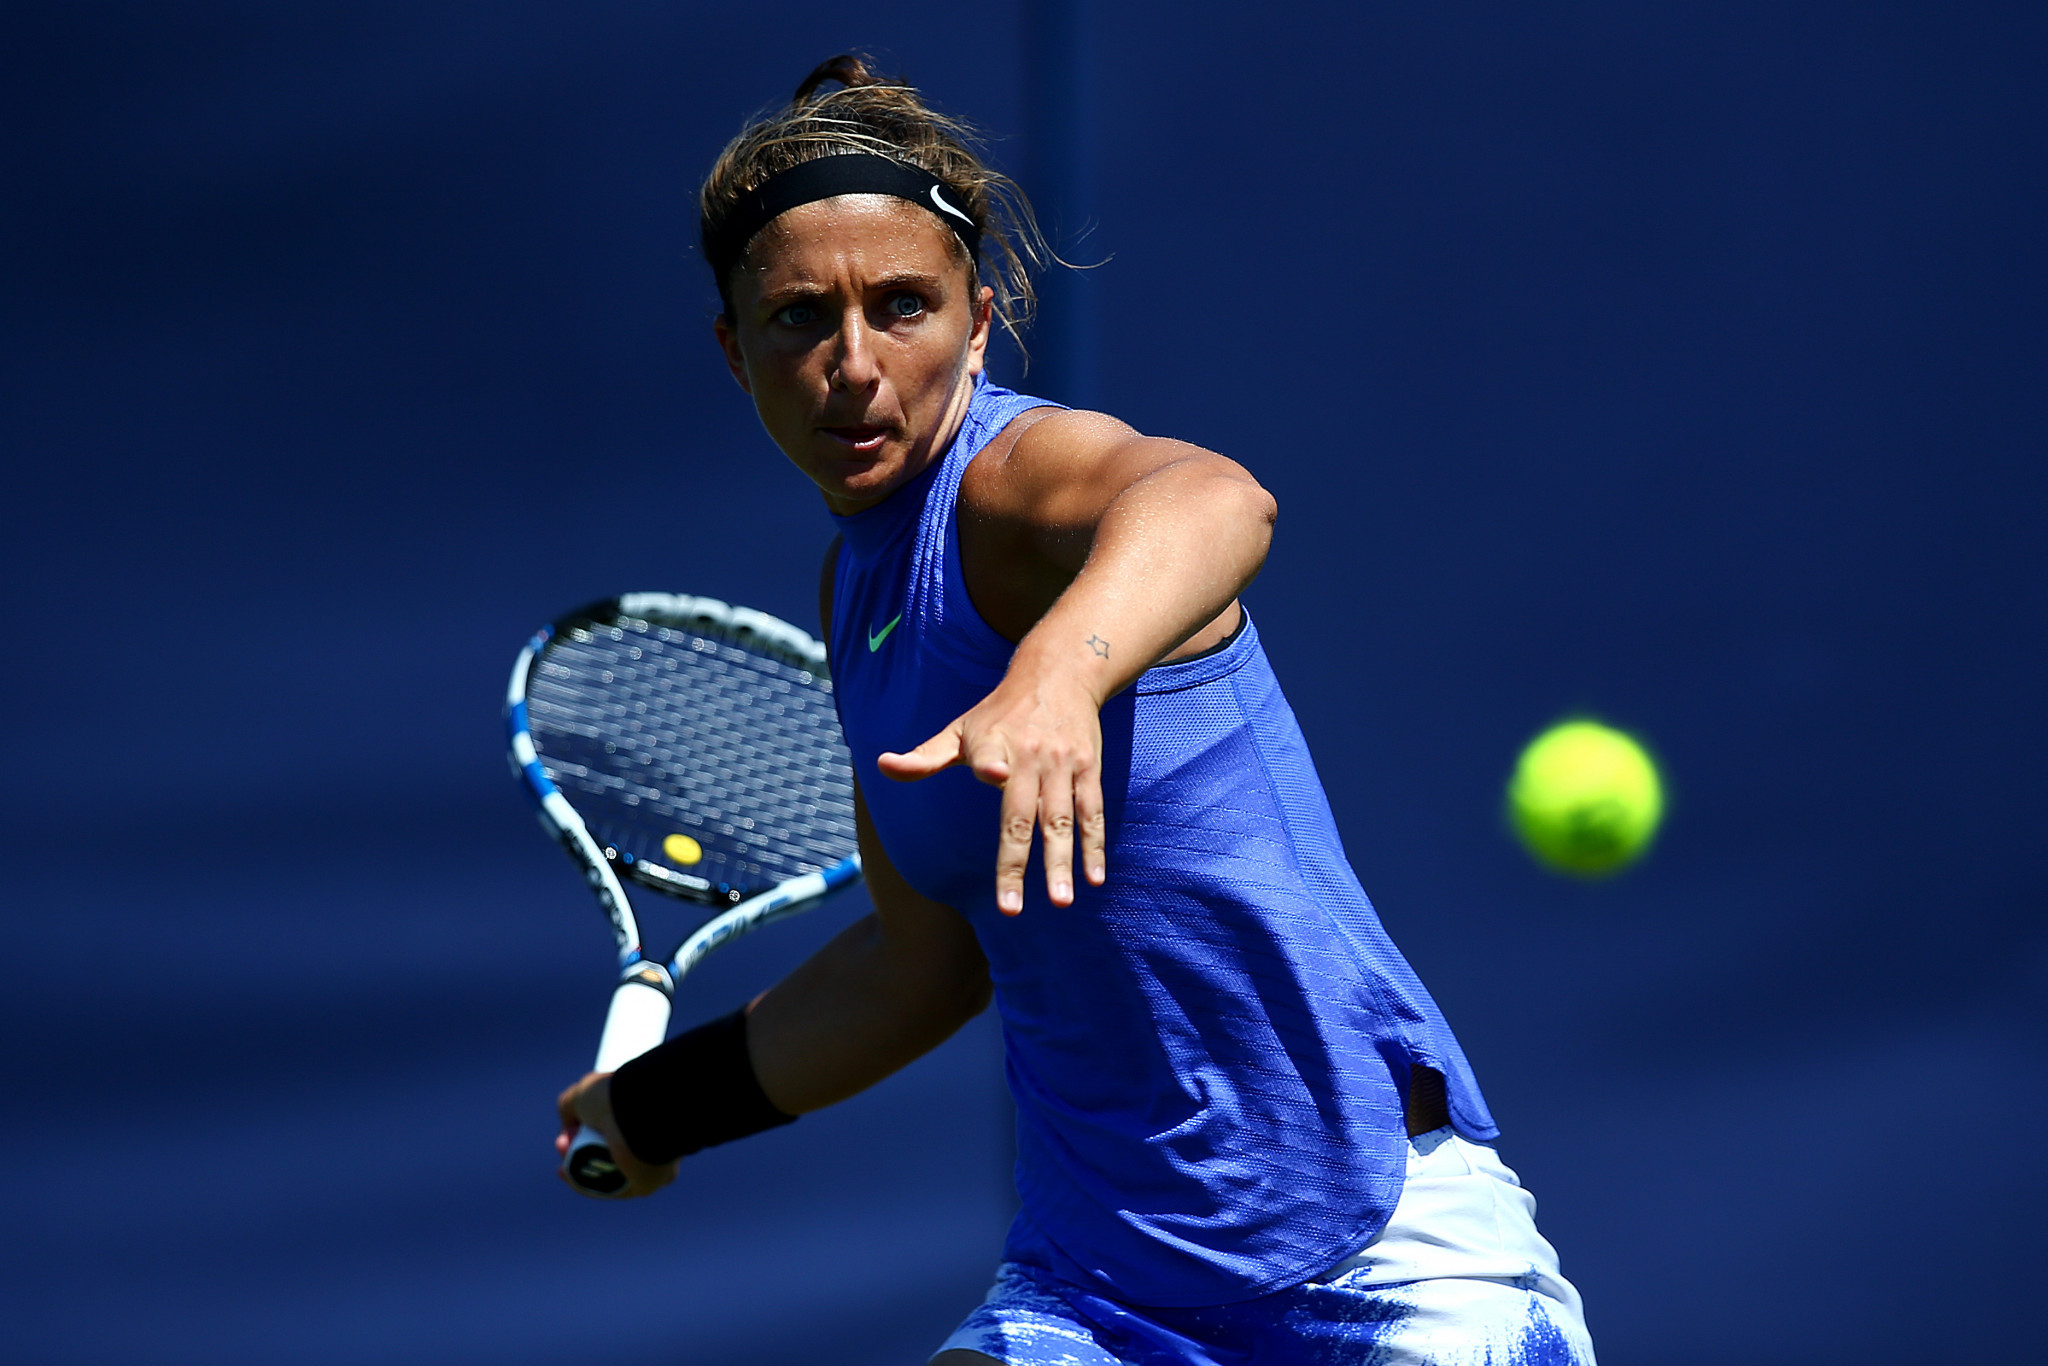 Sara Errani has attended a Court of Arbitration for Sport hearing ©Getty Images